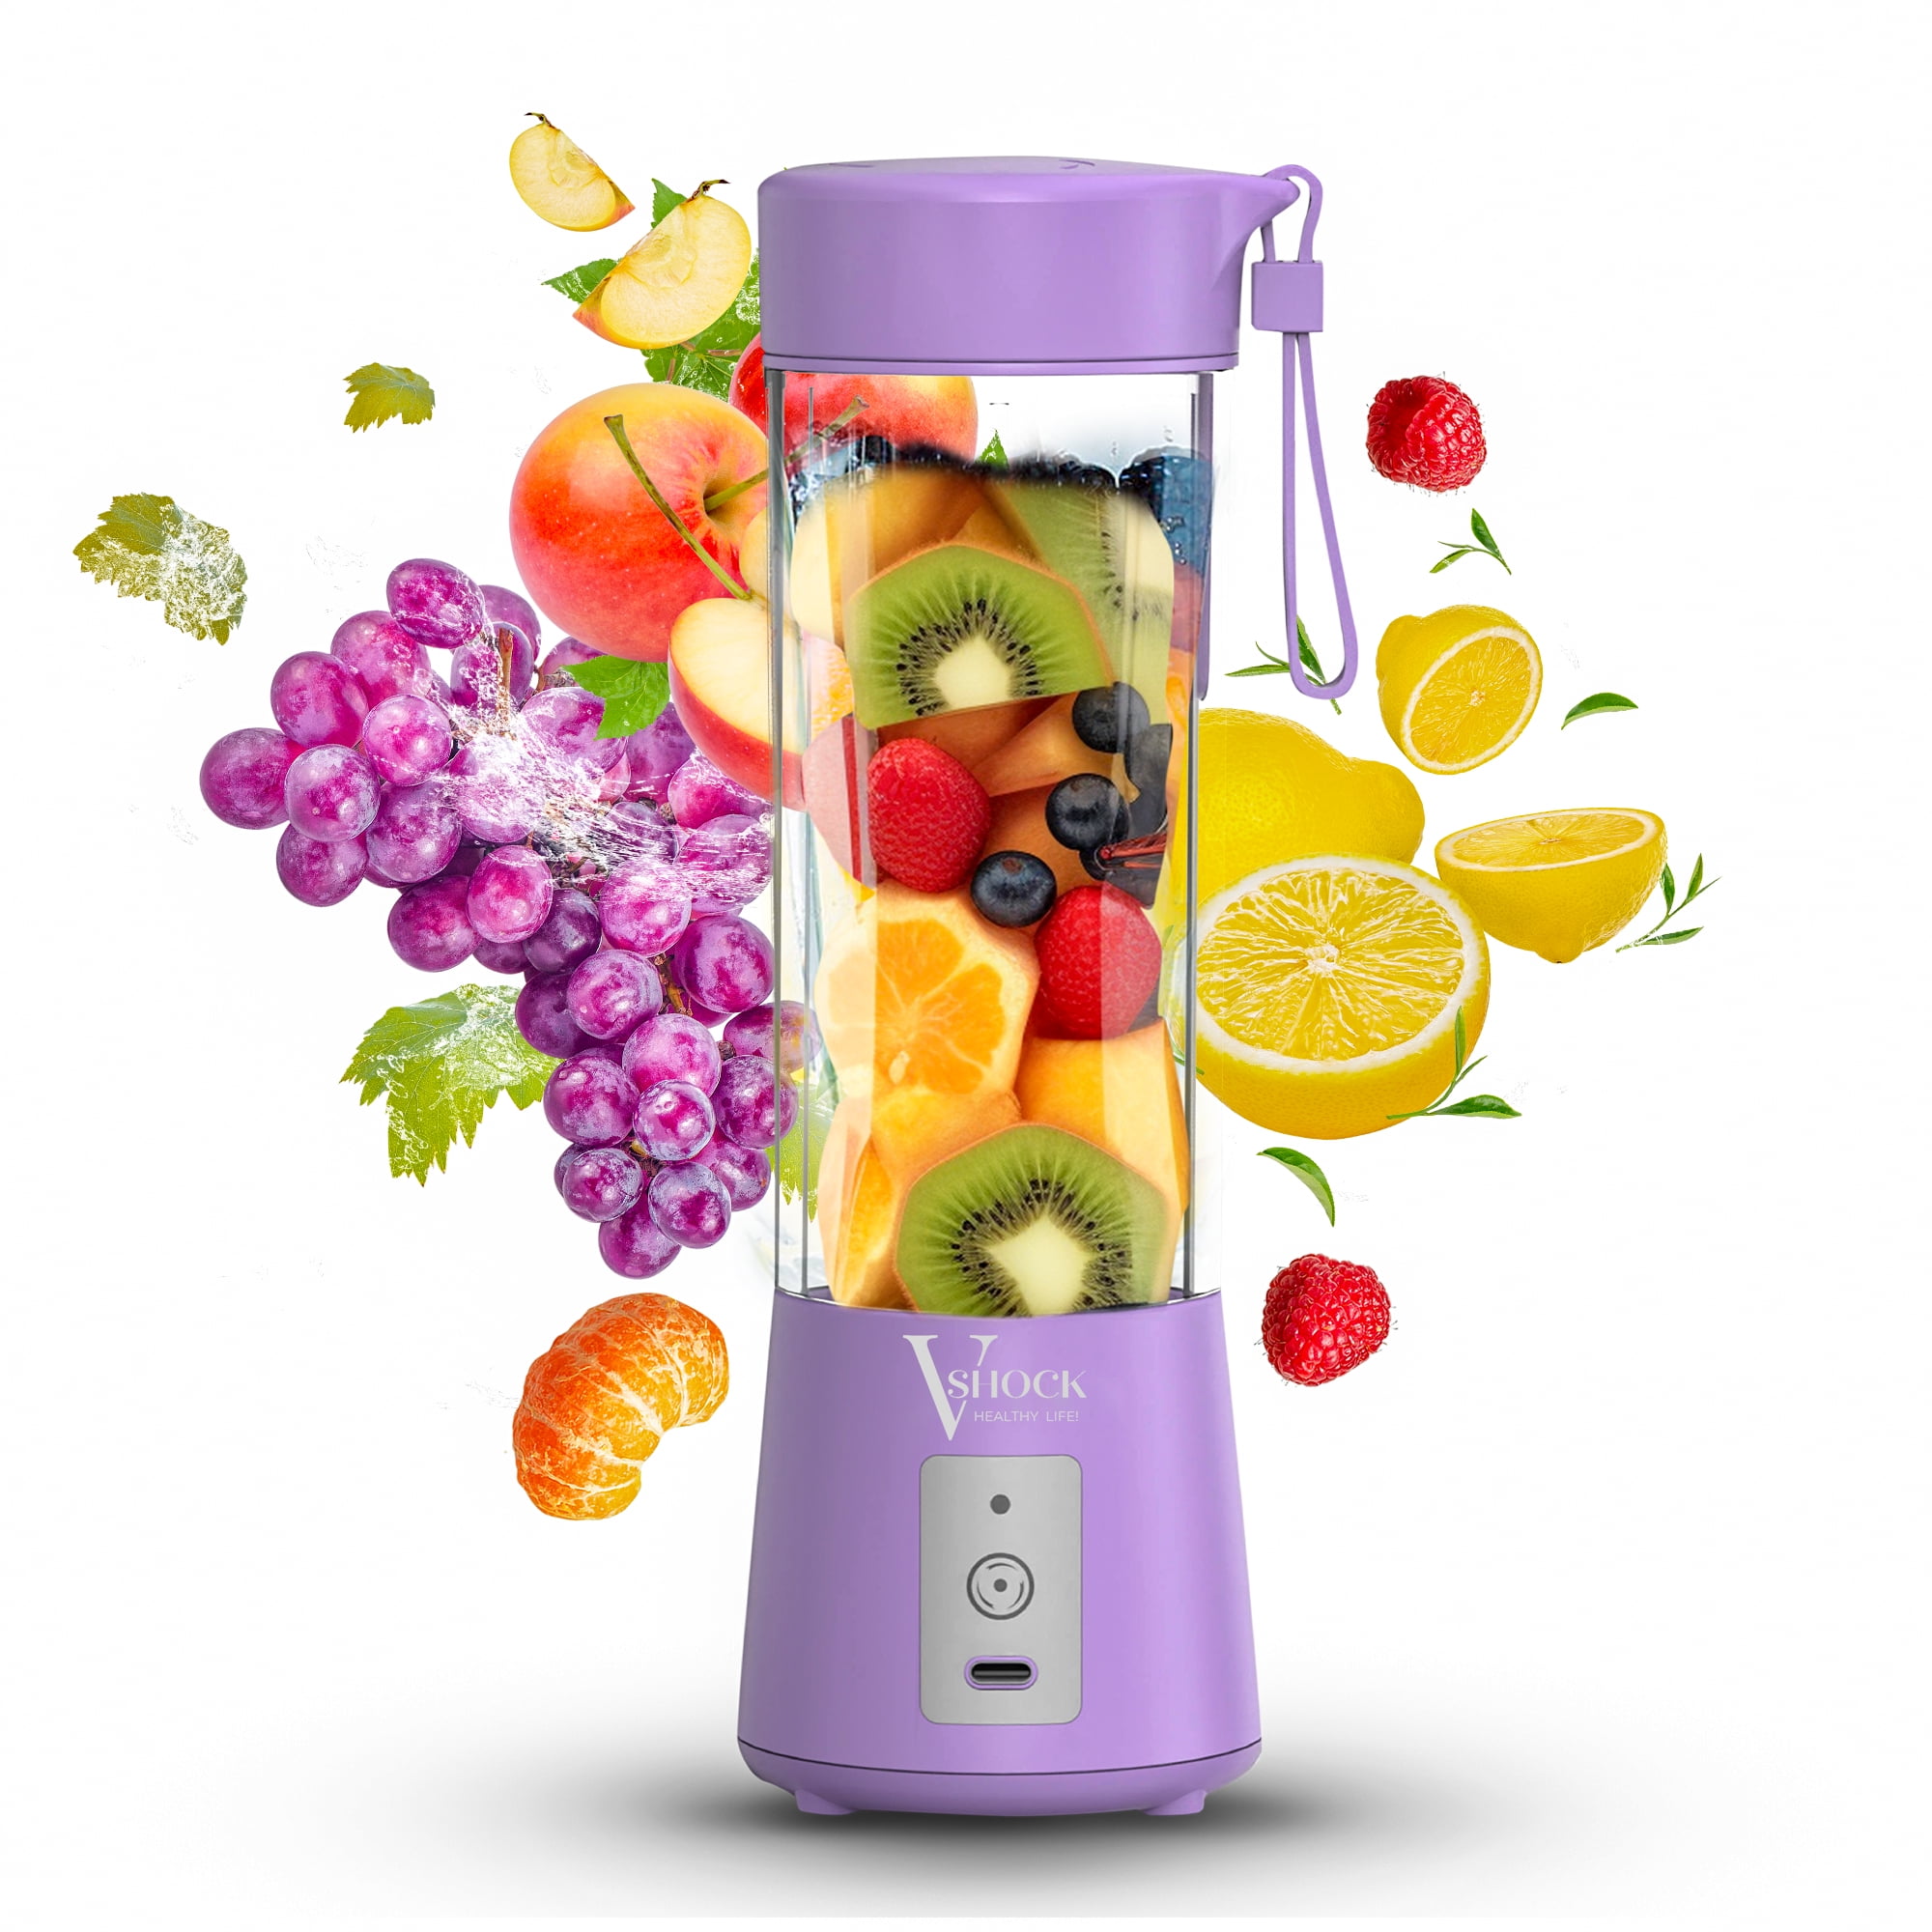 Nurtured Effect Portable Blender Cup - The Easy and Convenient Mini Blender  for On-The-Go Healthy Living with 20 oz Drinking Capacity